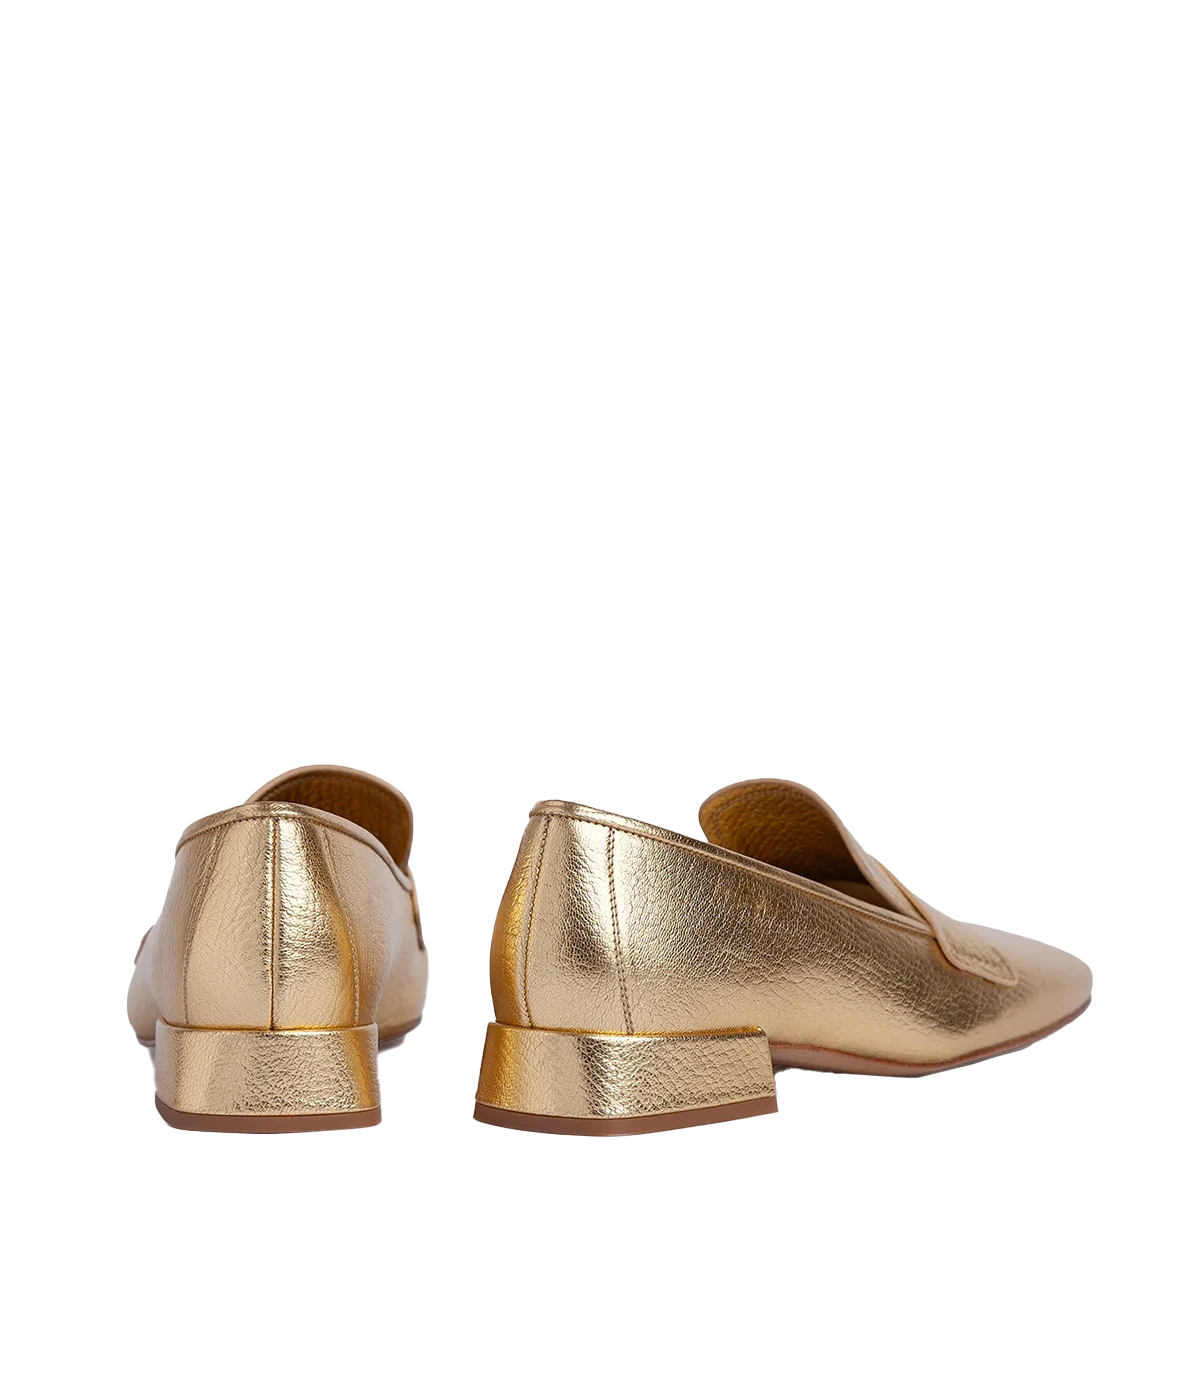 Galit Loafer in Ore